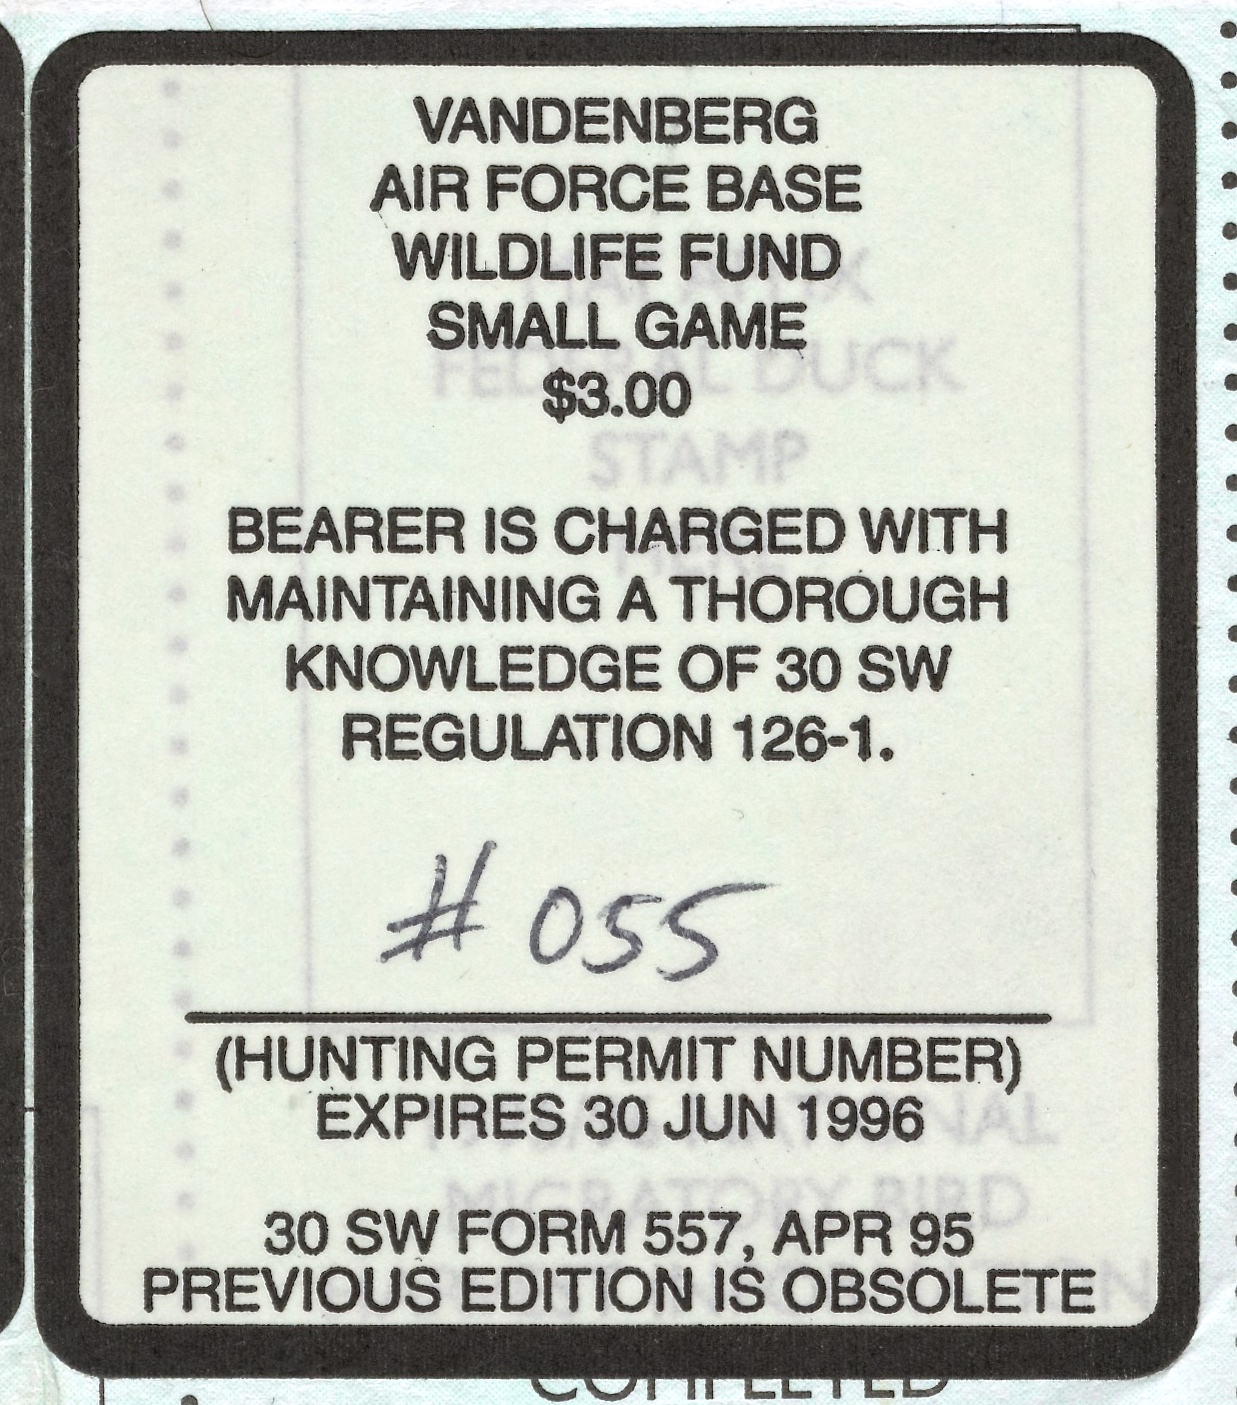 1995-96 VAFB Small Game